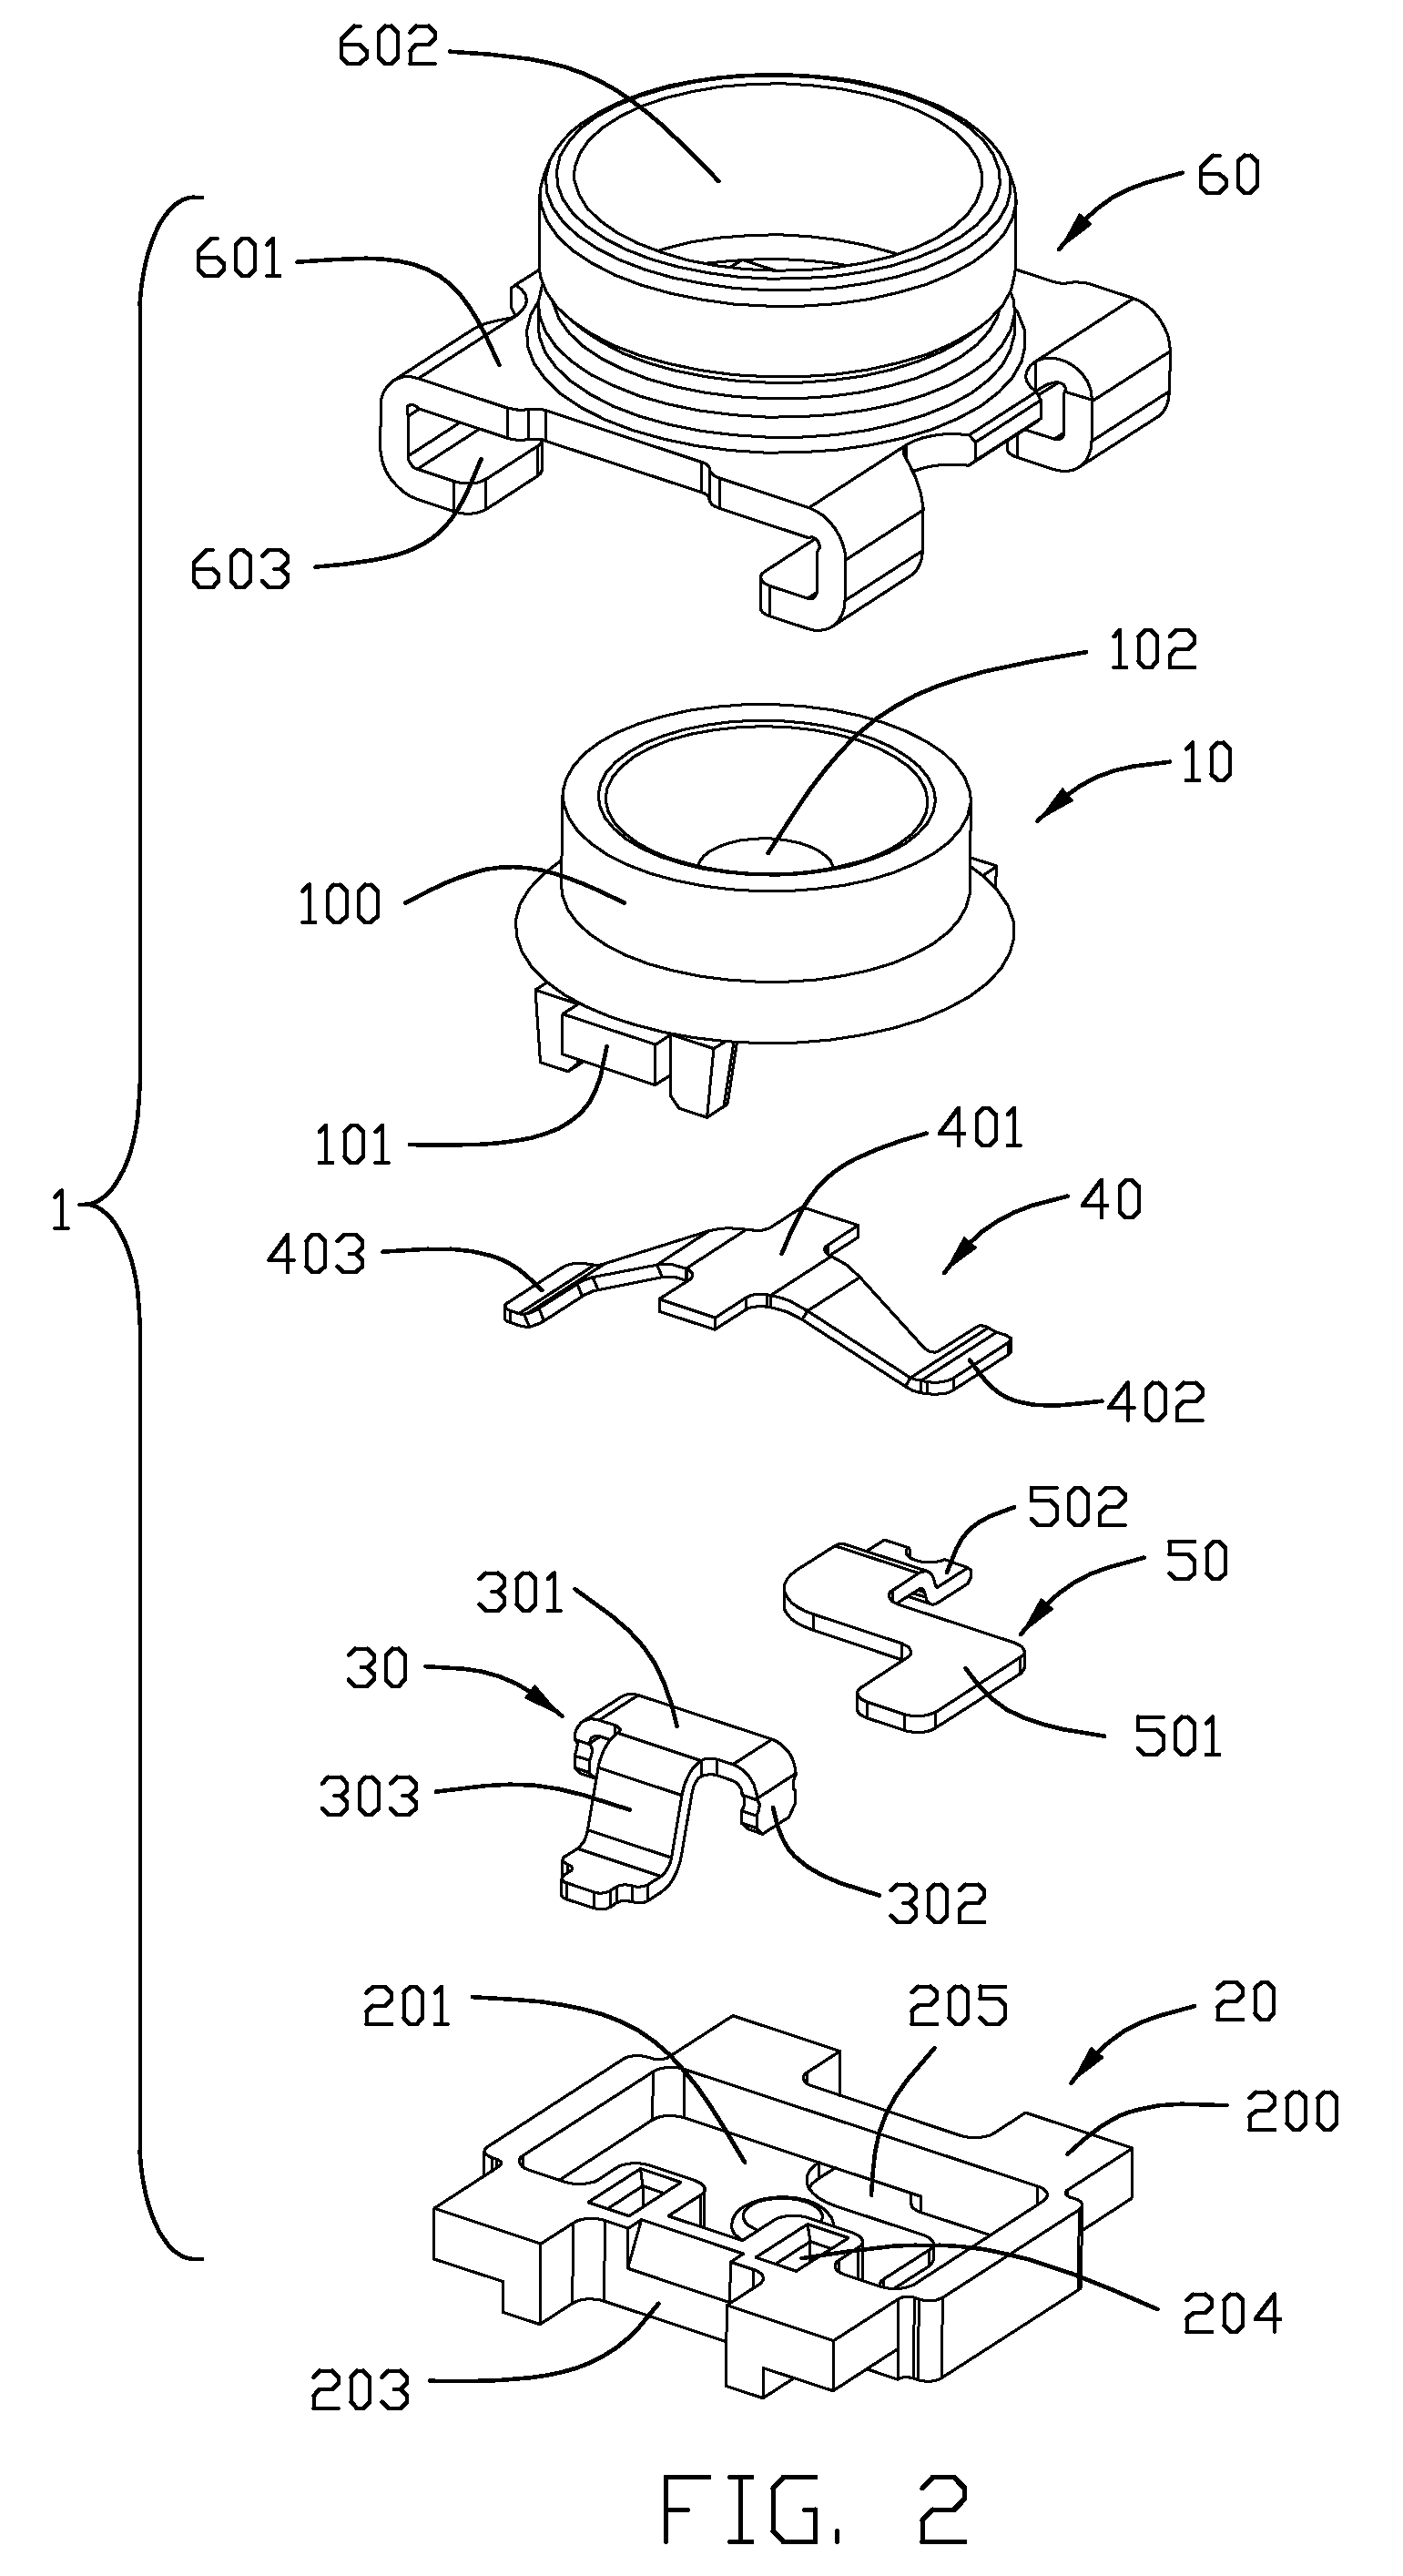 Coaxial connector with a new type of contact